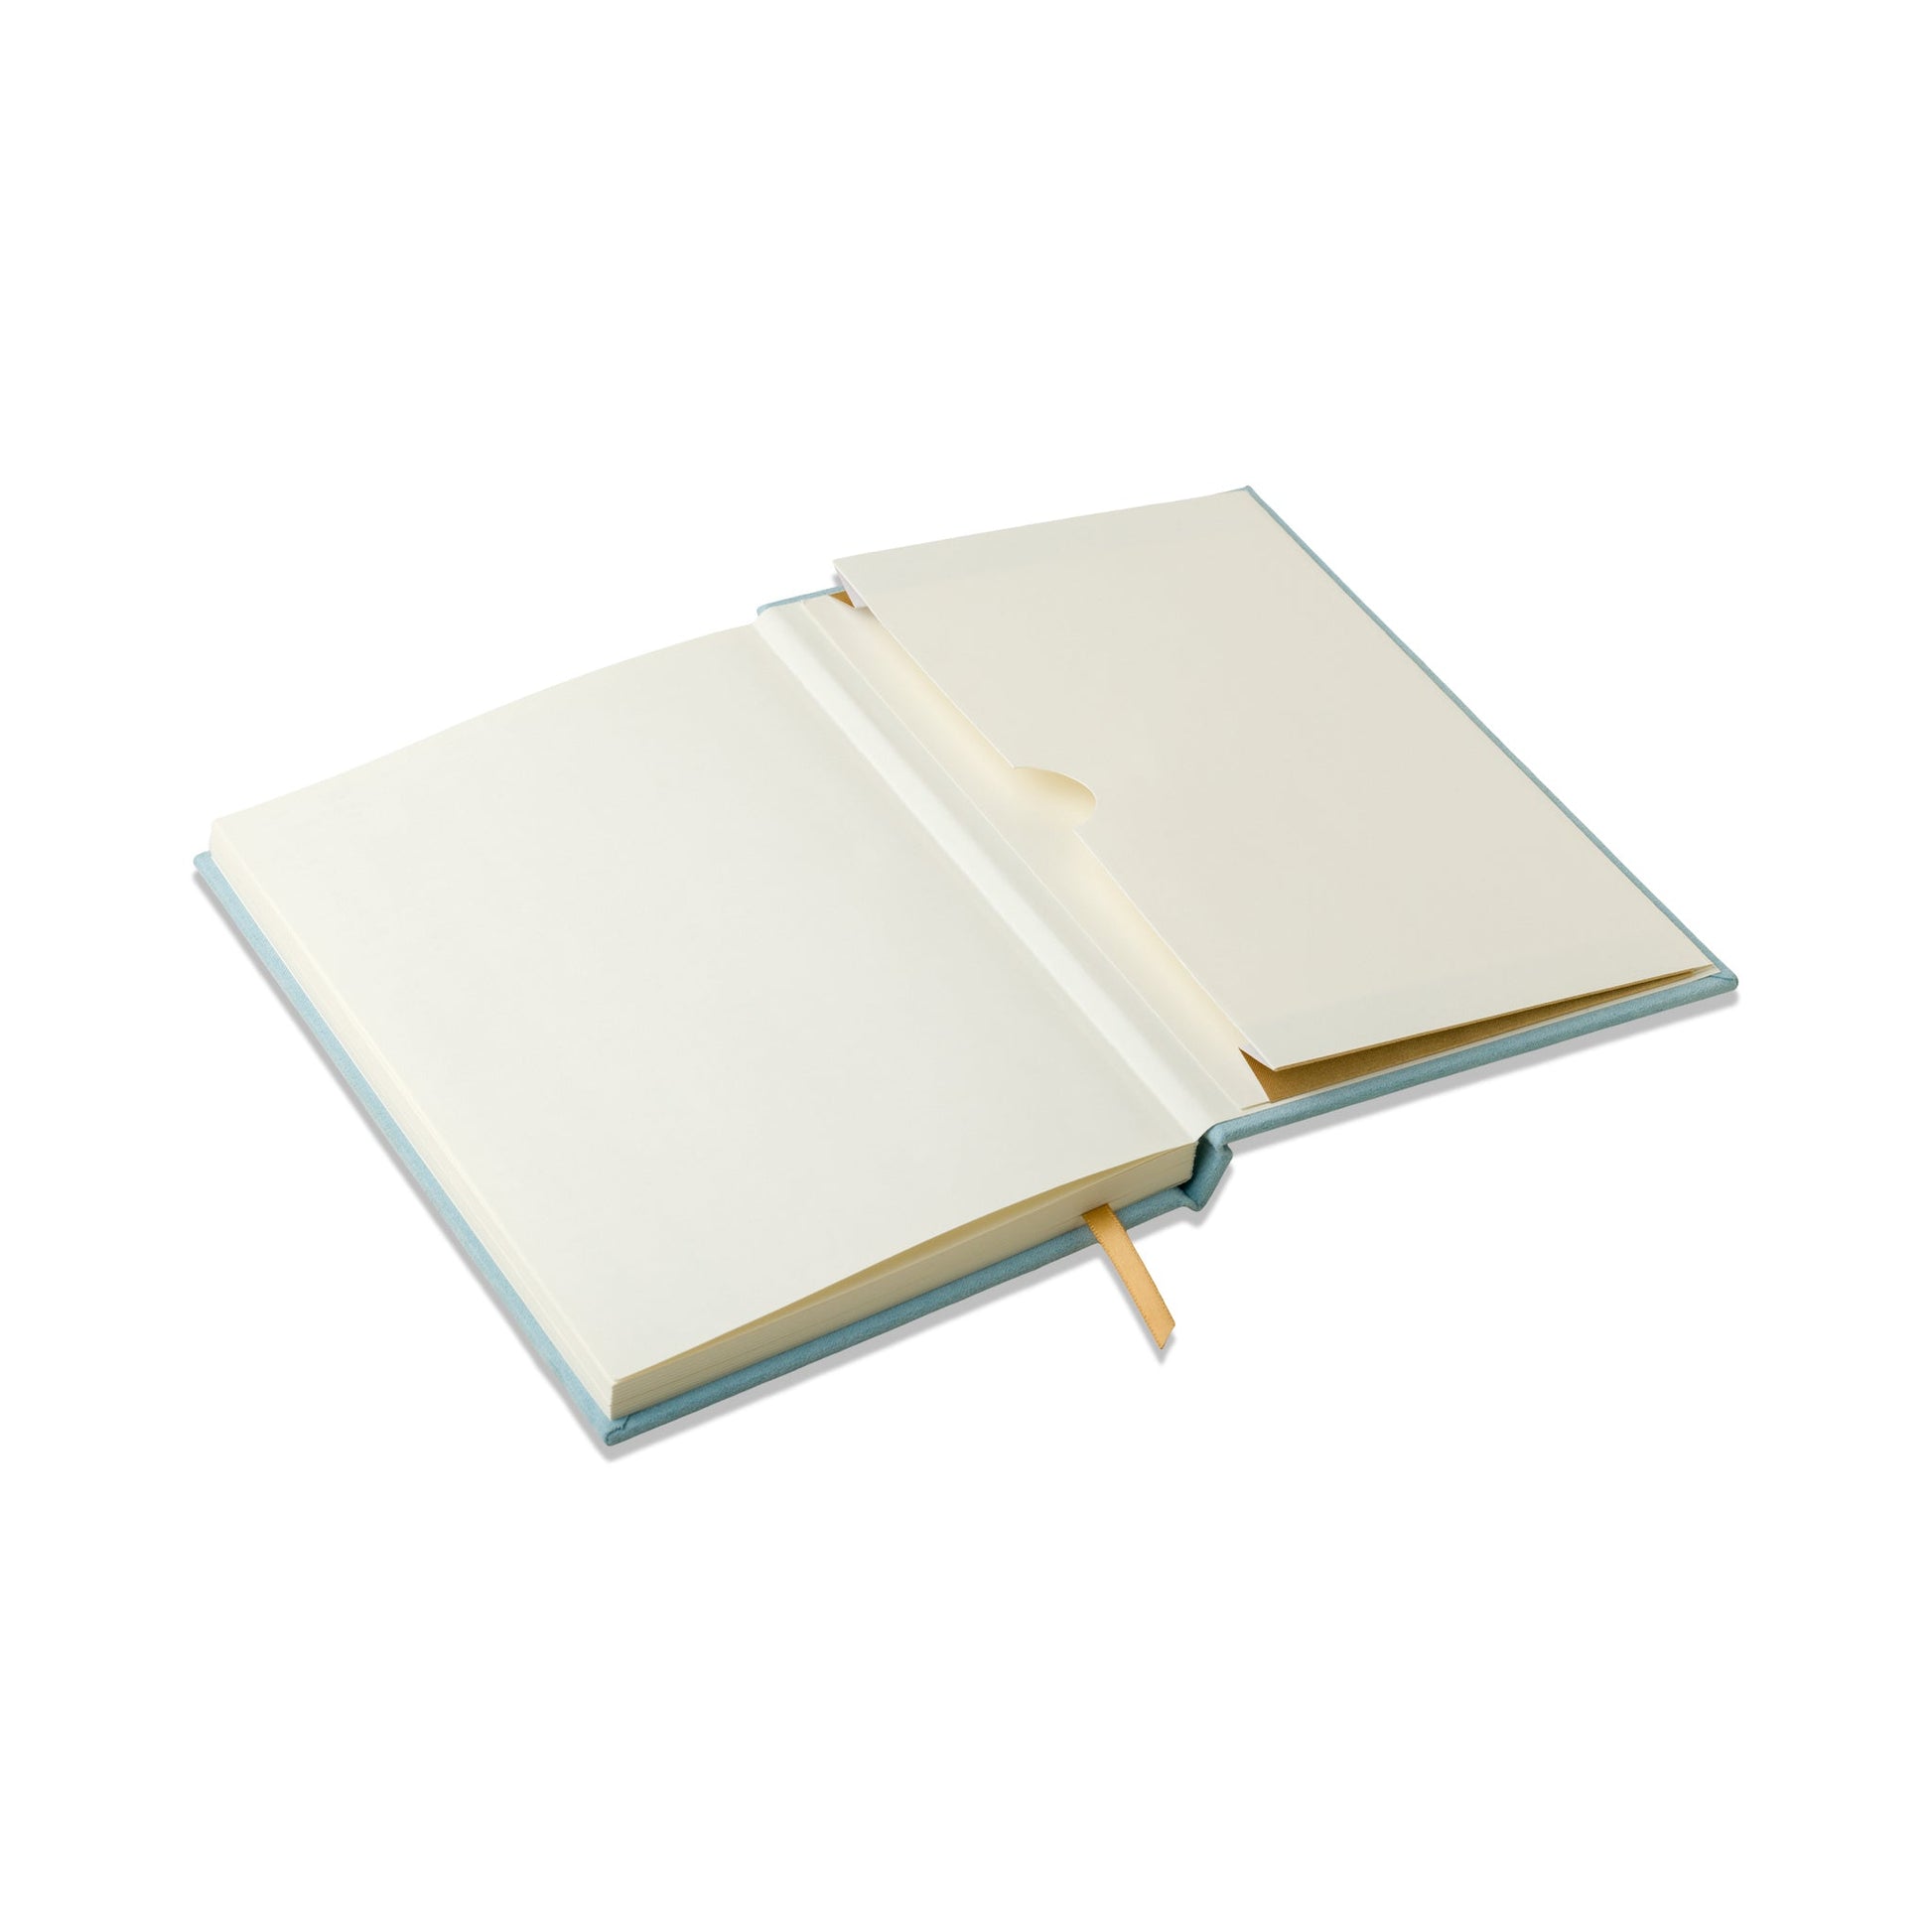 Hard Cover Suede Cloth Journal With Pocket - Arch Dot lay-flat picture with pocket folder